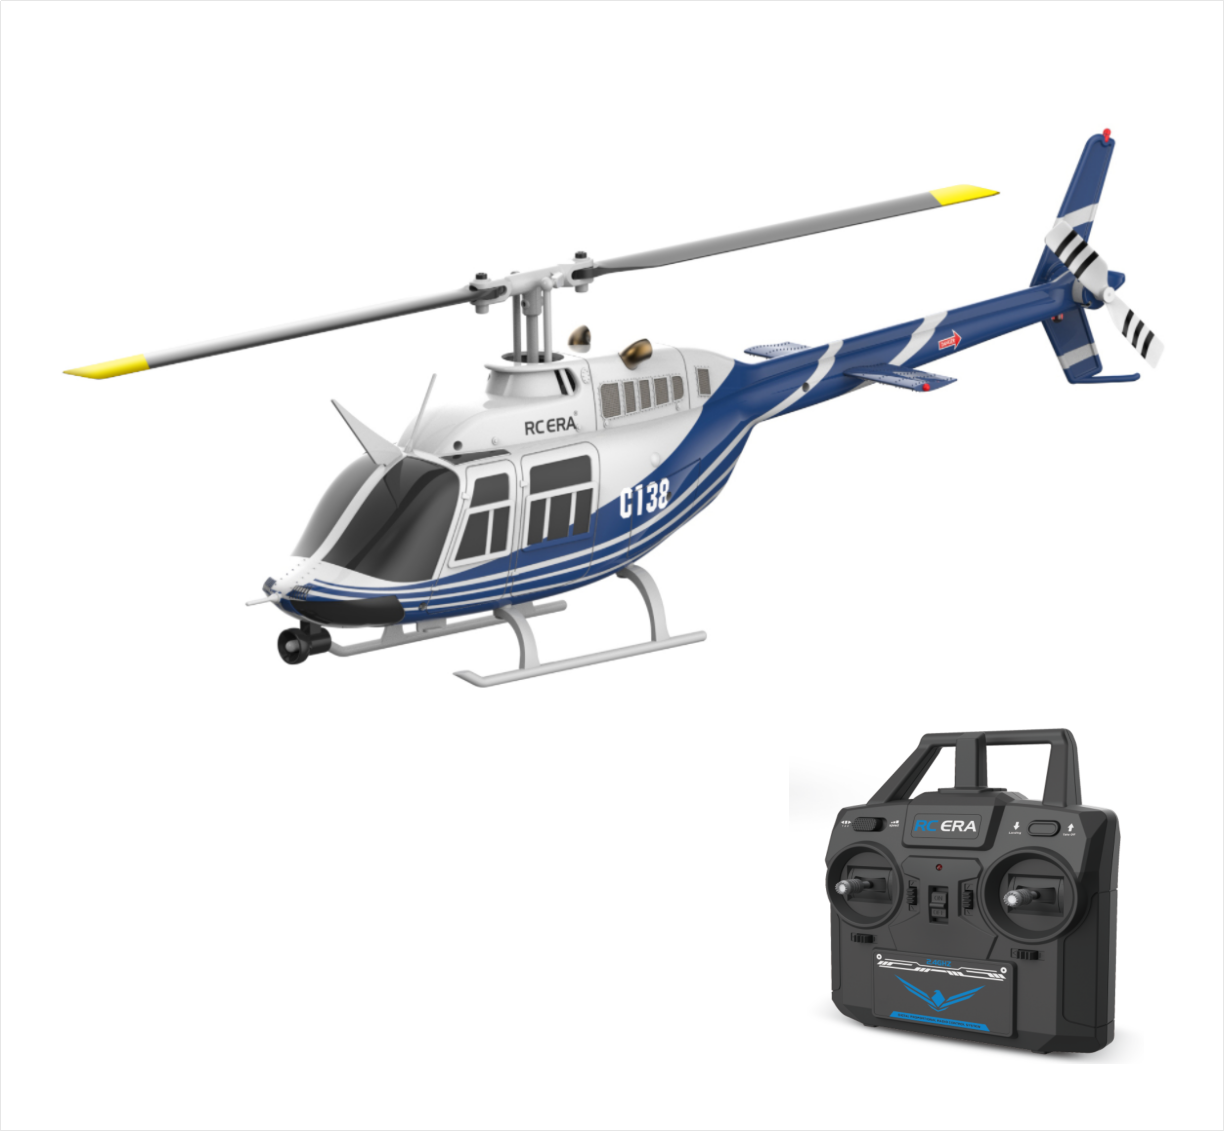 RC ERA C138 Bell 206 6CH 1/33 Scale Flybarless Realistic Brushed RC  Helicopter (Altitude Hold Edition) - Upgraded Version / Red / RTF with  Three ...